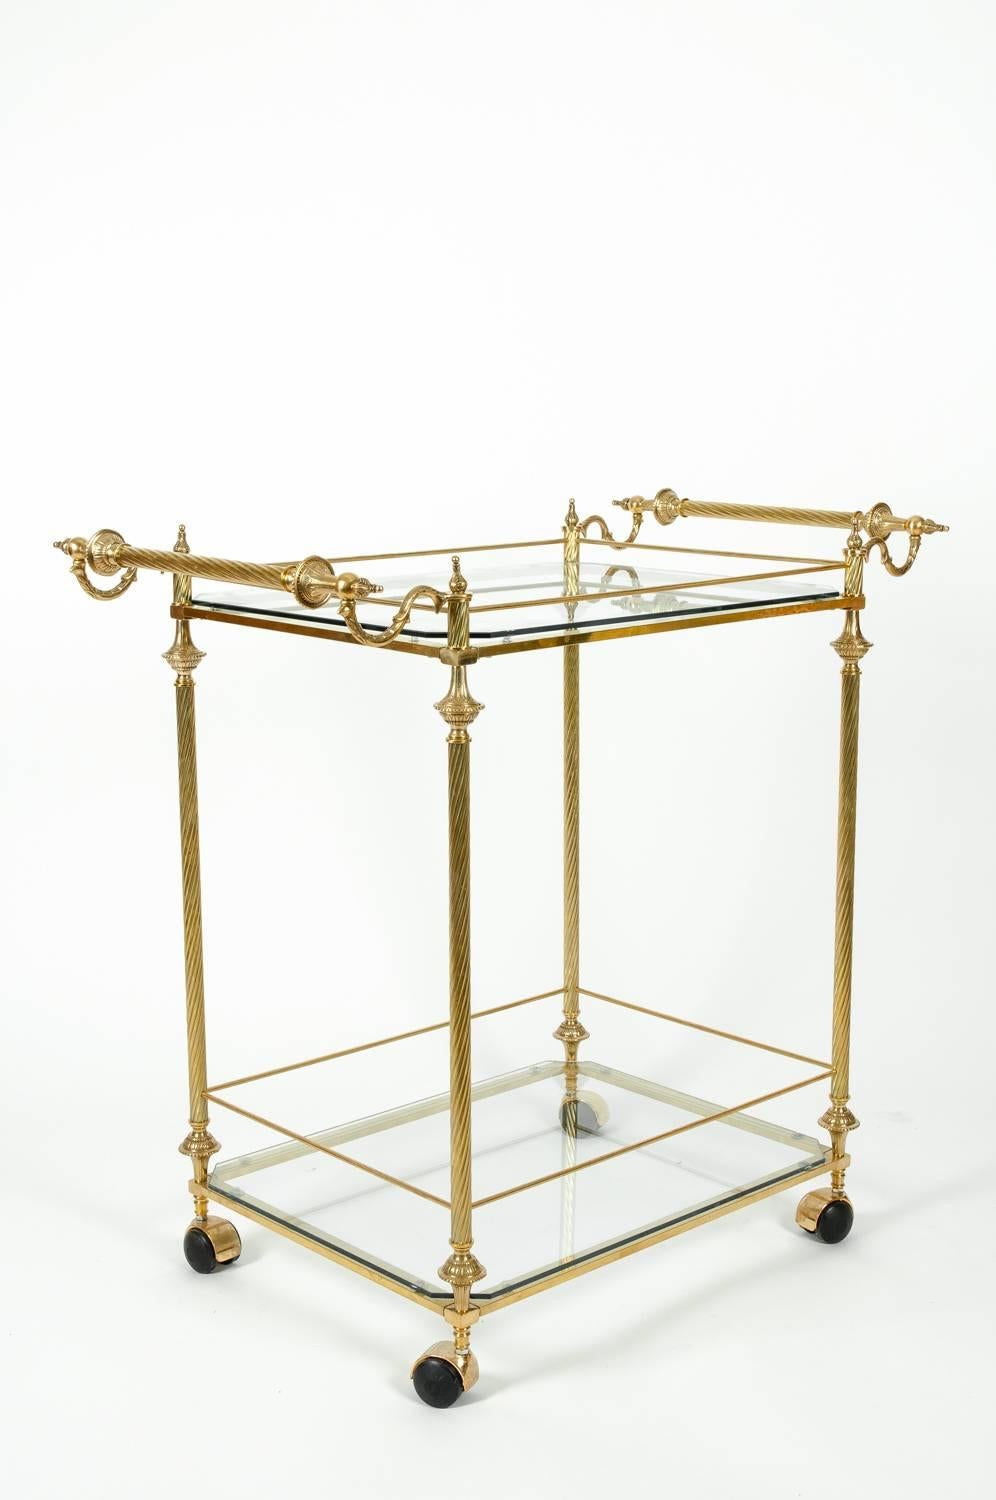 Vintage French solid brass wheeled bar cart / tea trolley with glass shelves and two side handles. The Bar cart / tea trolley is in excellent vintage condition. The cart measure about 33 inches length x 20 inches width x 32 inches high.